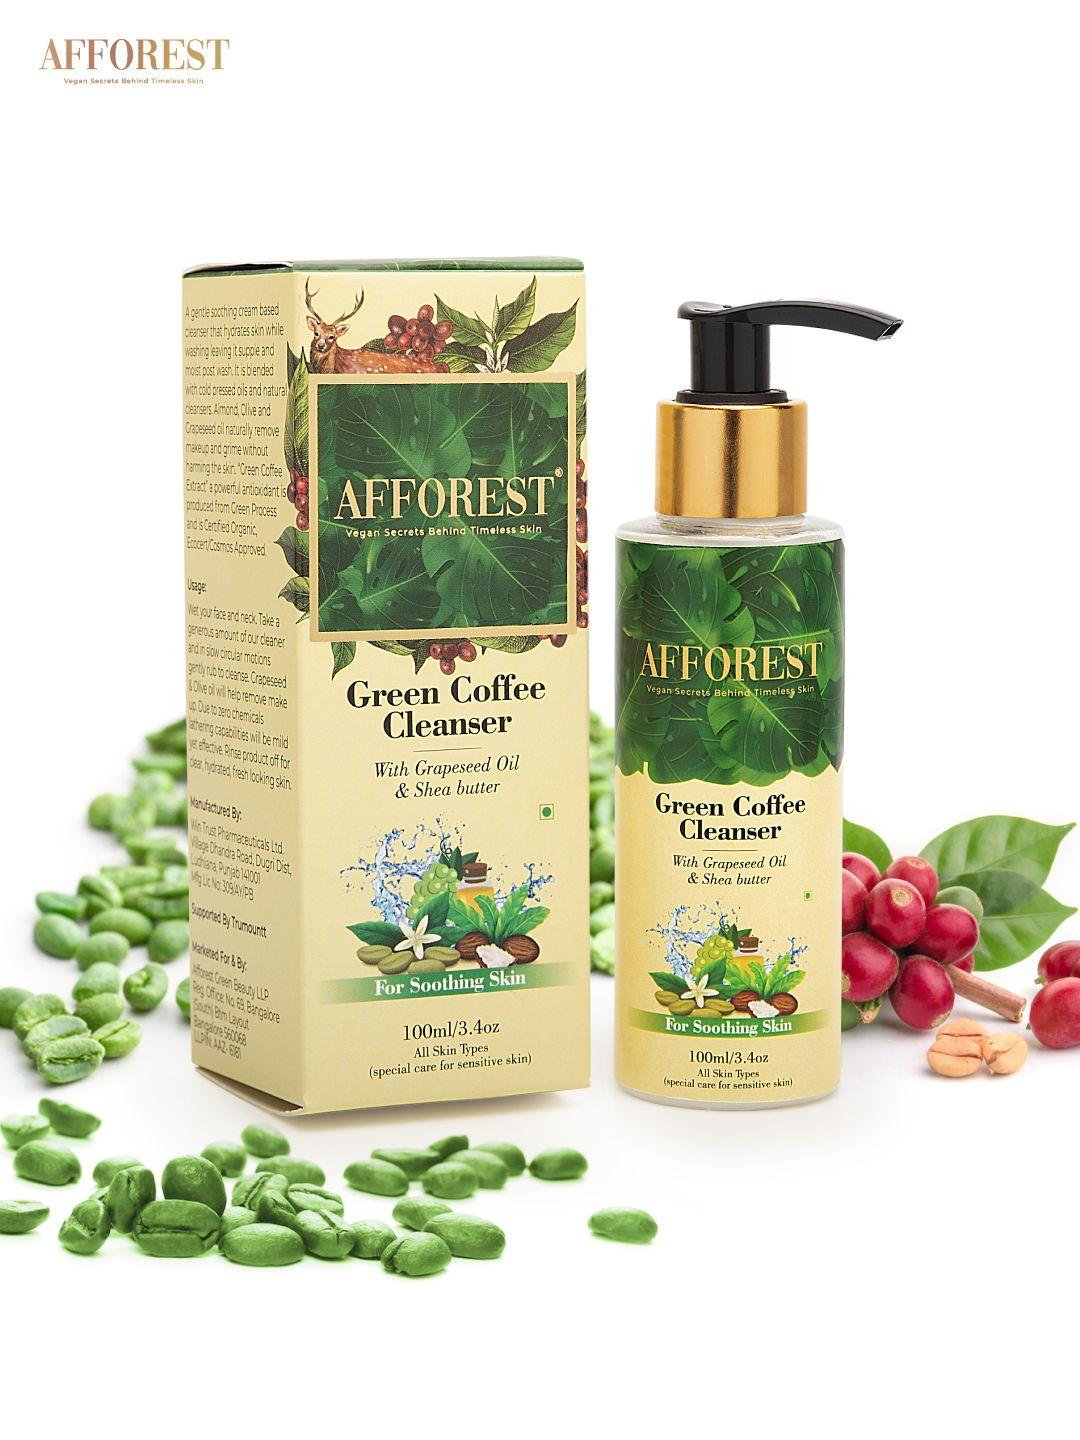 afforest green coffee cleanser with grapeseed oil & shea butter - 100 ml